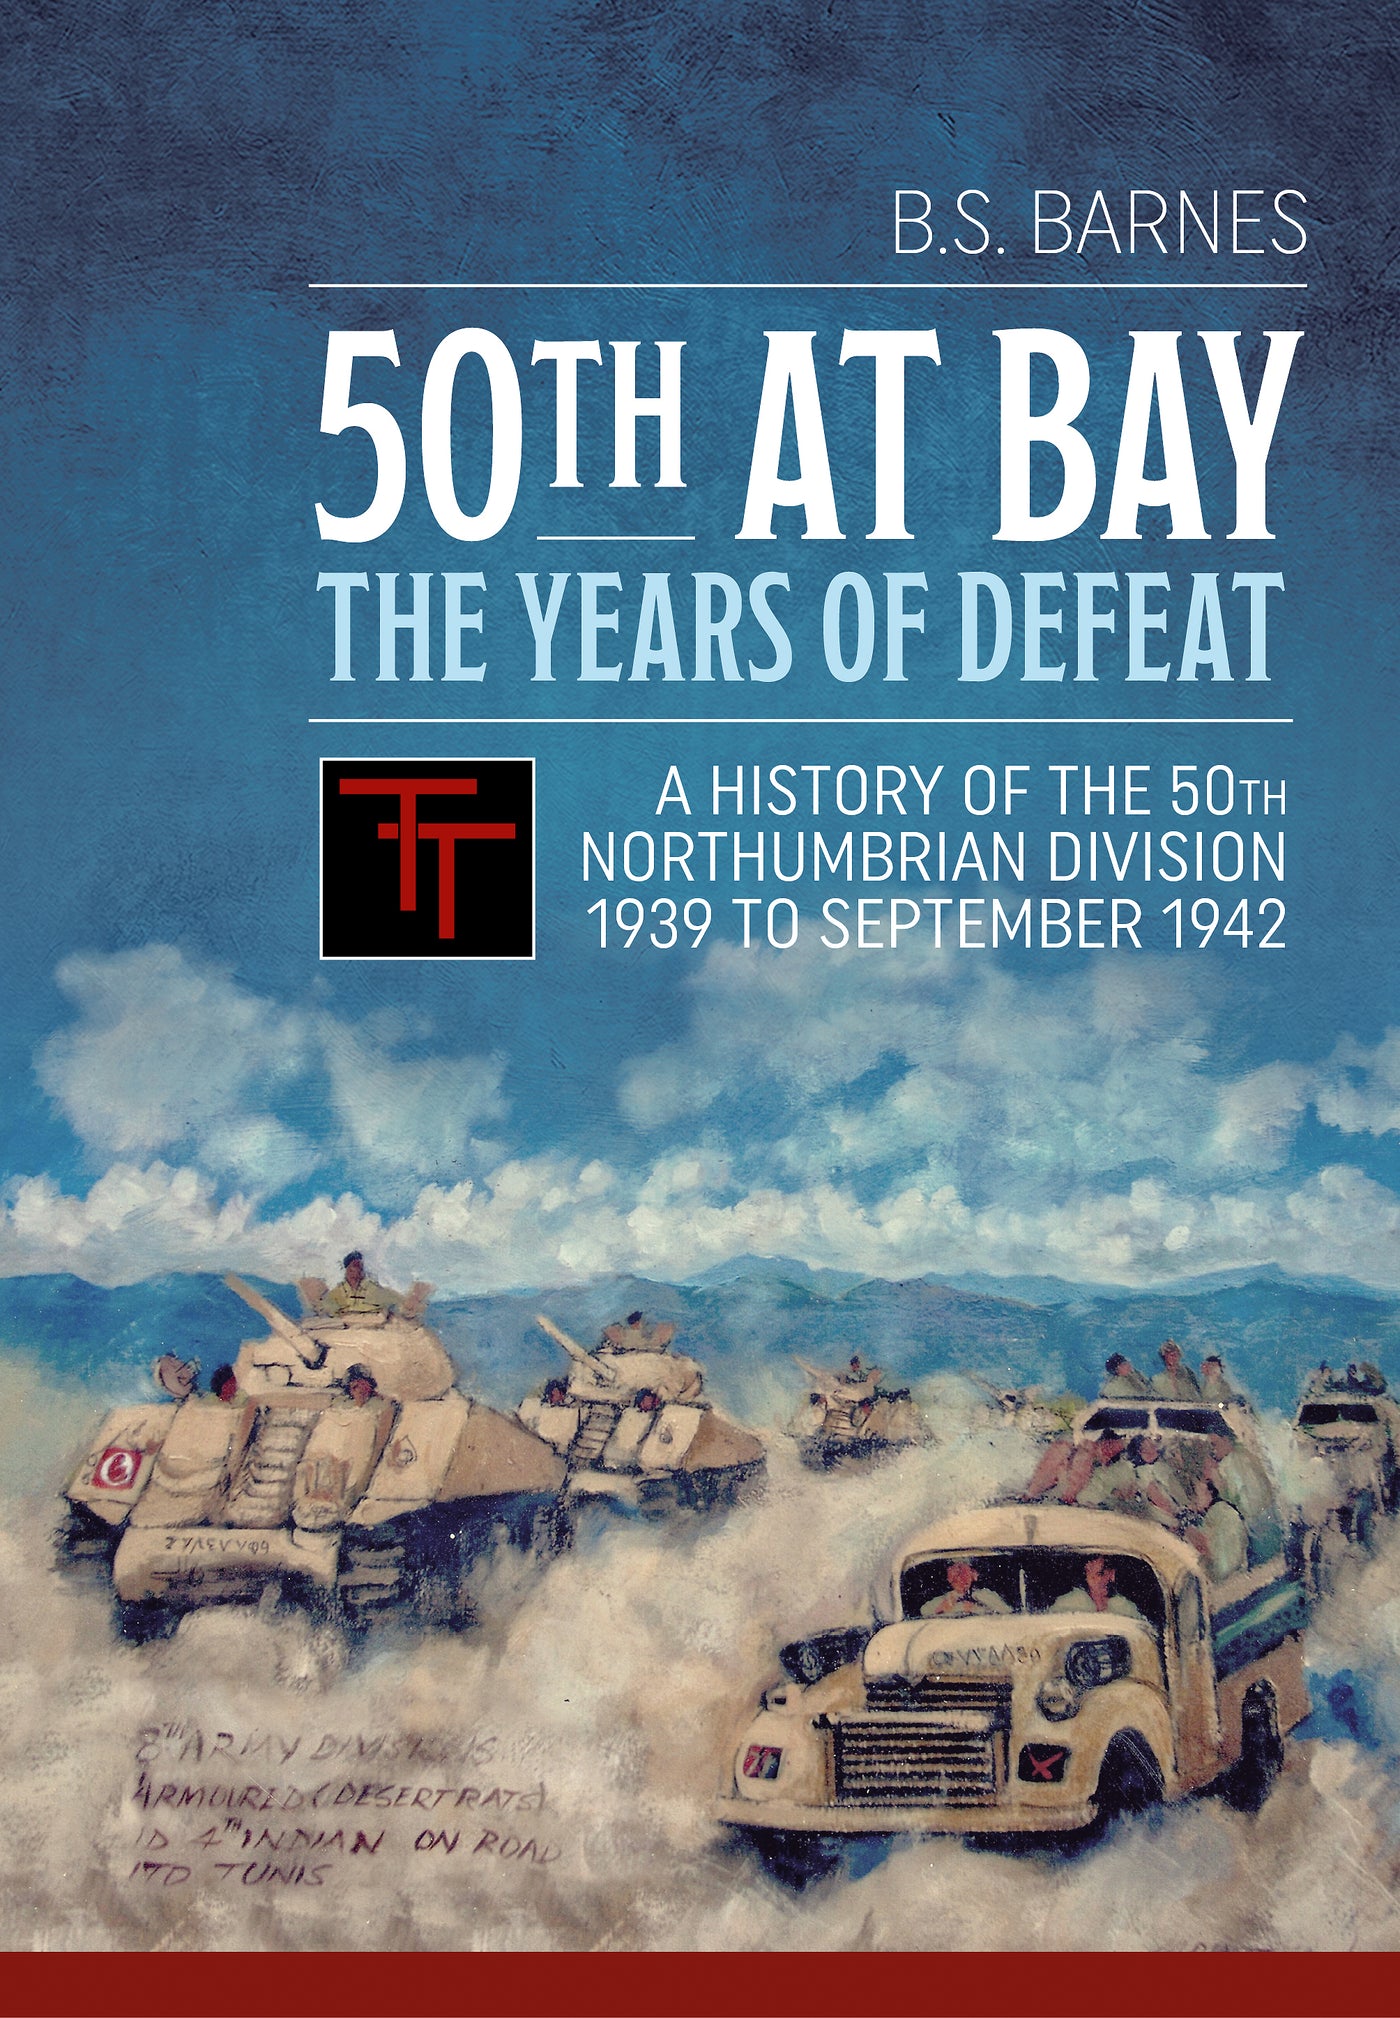 50th at Bay - The Years of Defeat